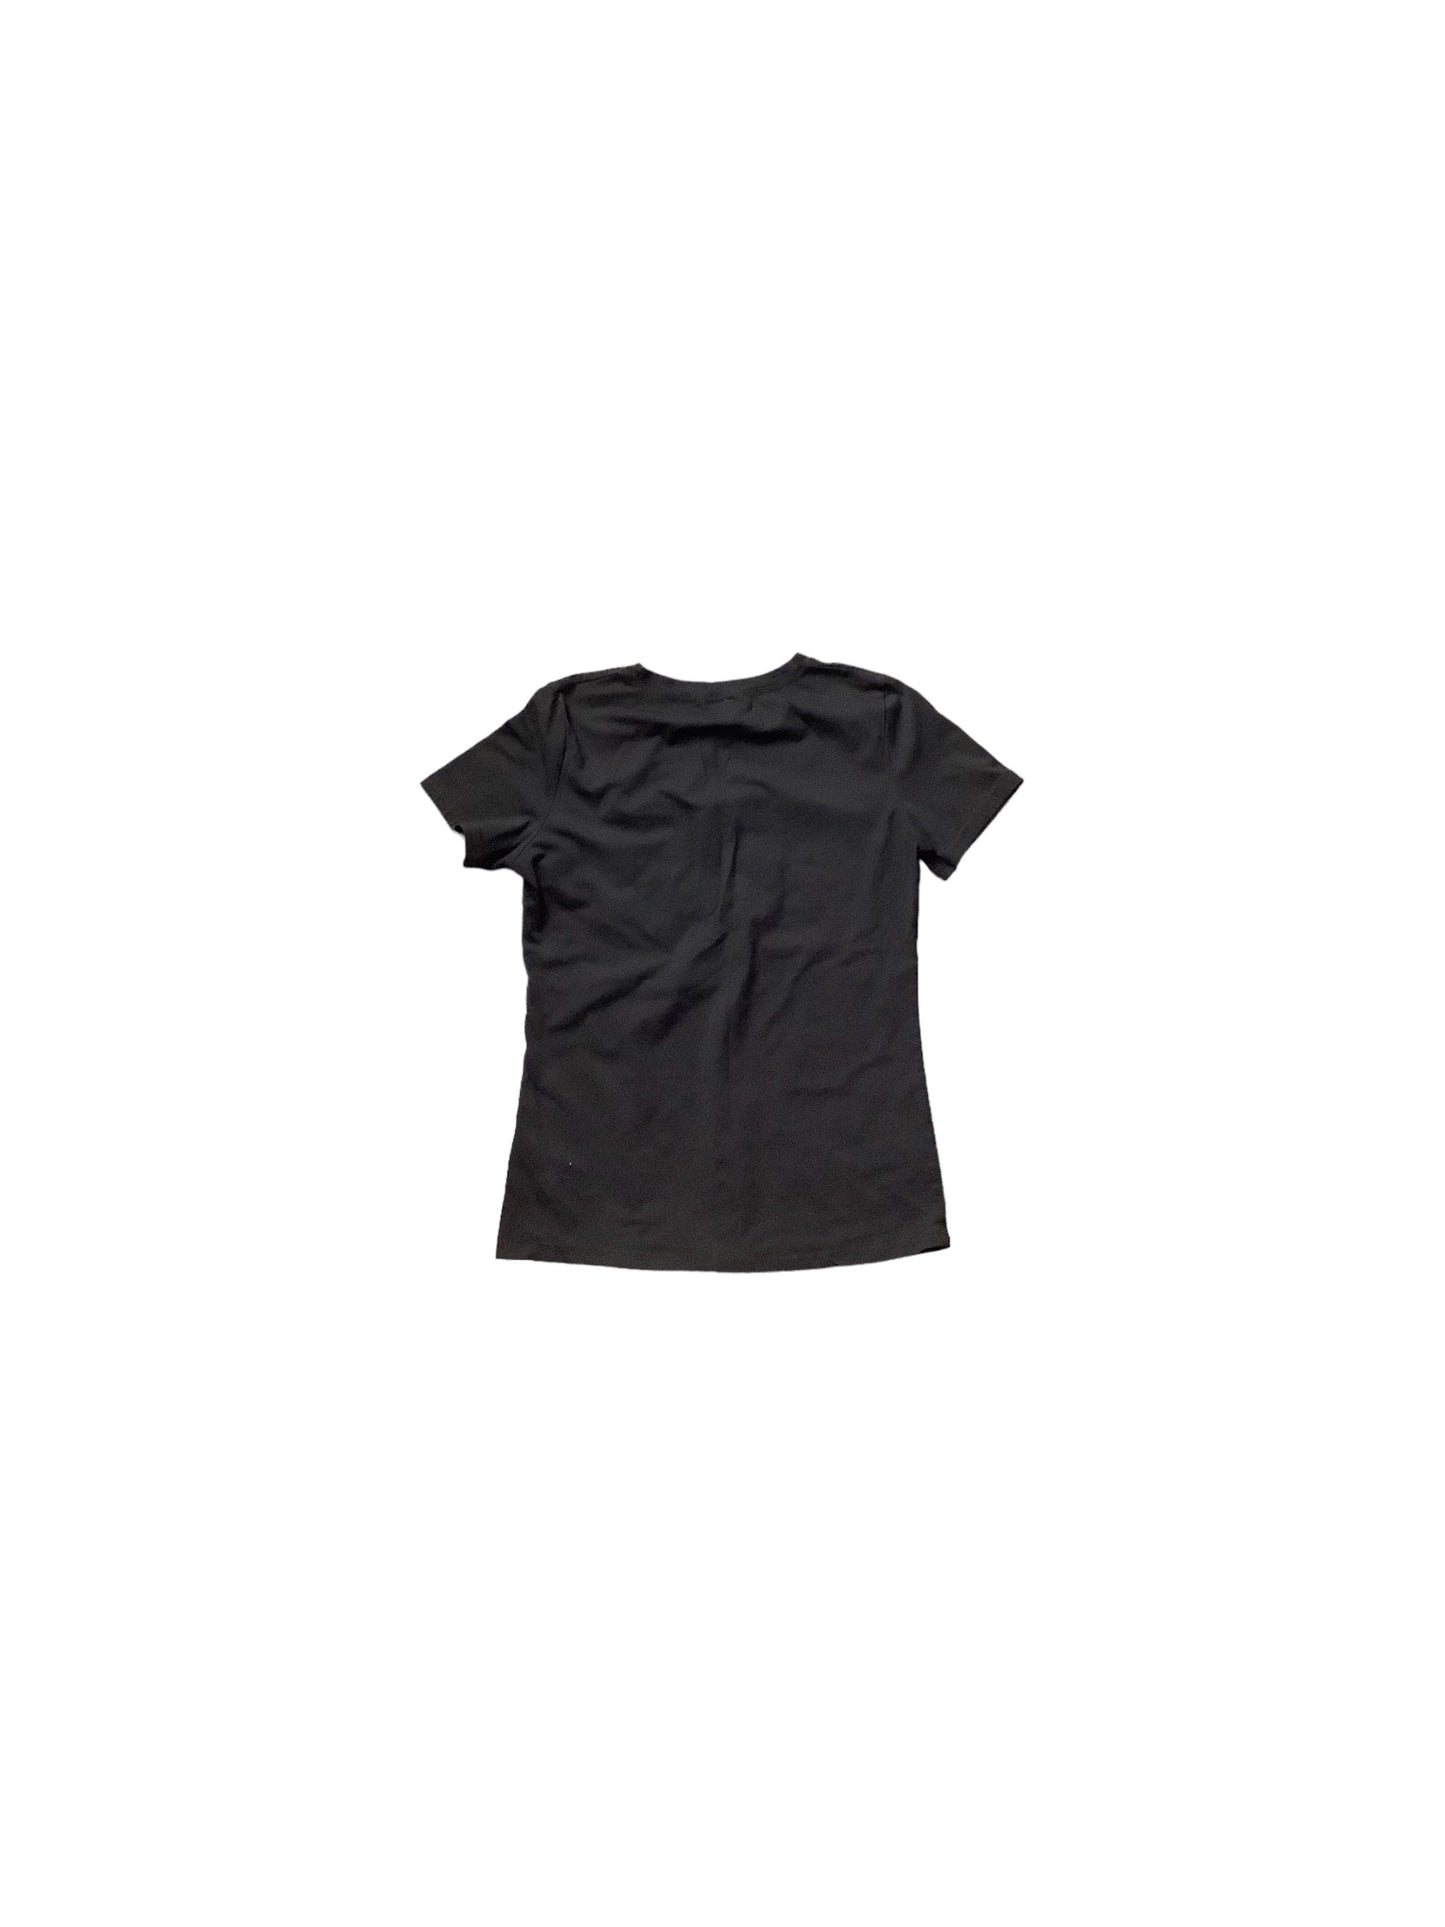 Black Top Short Sleeve Basic Clothes Mentor, Size M